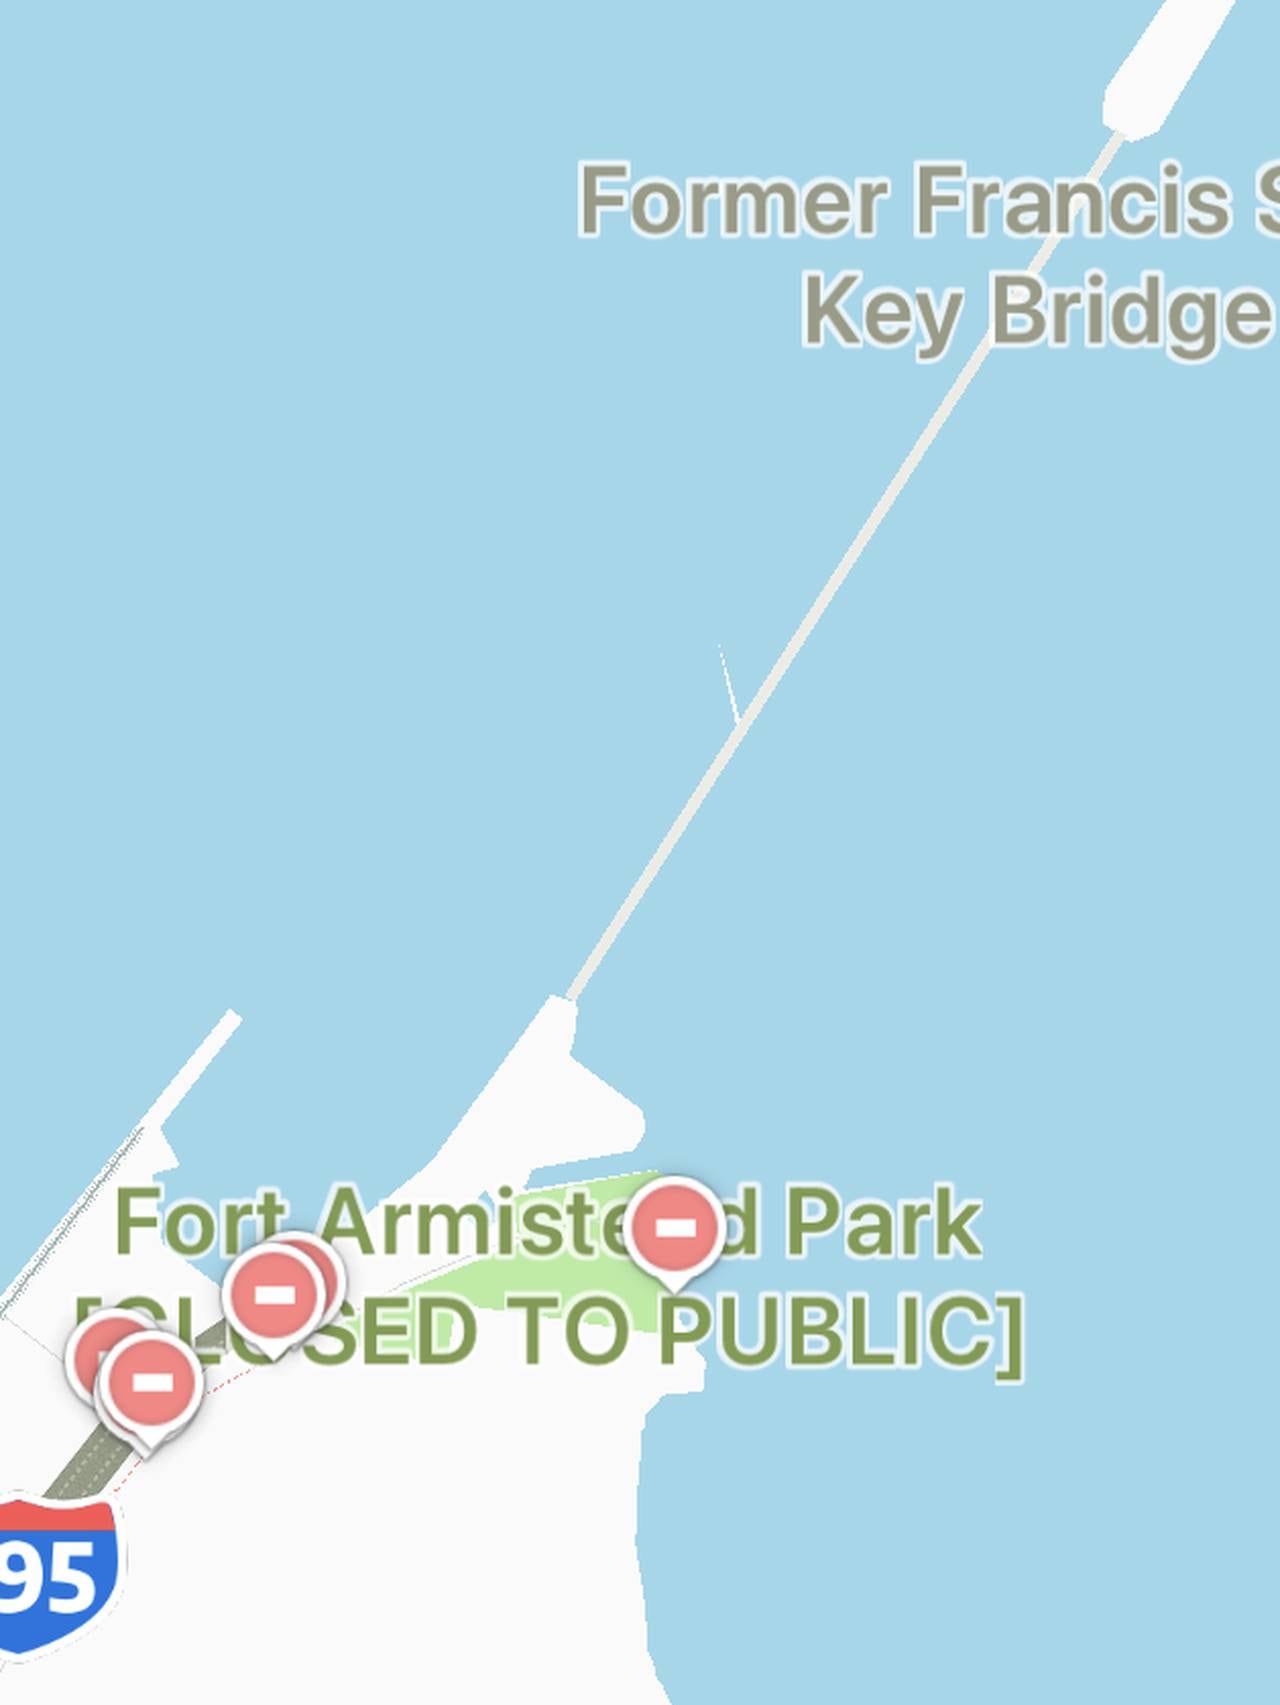 On Waze, the bridge is listed as the "former" Francis Scott Key Bridge, but the graphical representation of the bridge remains.